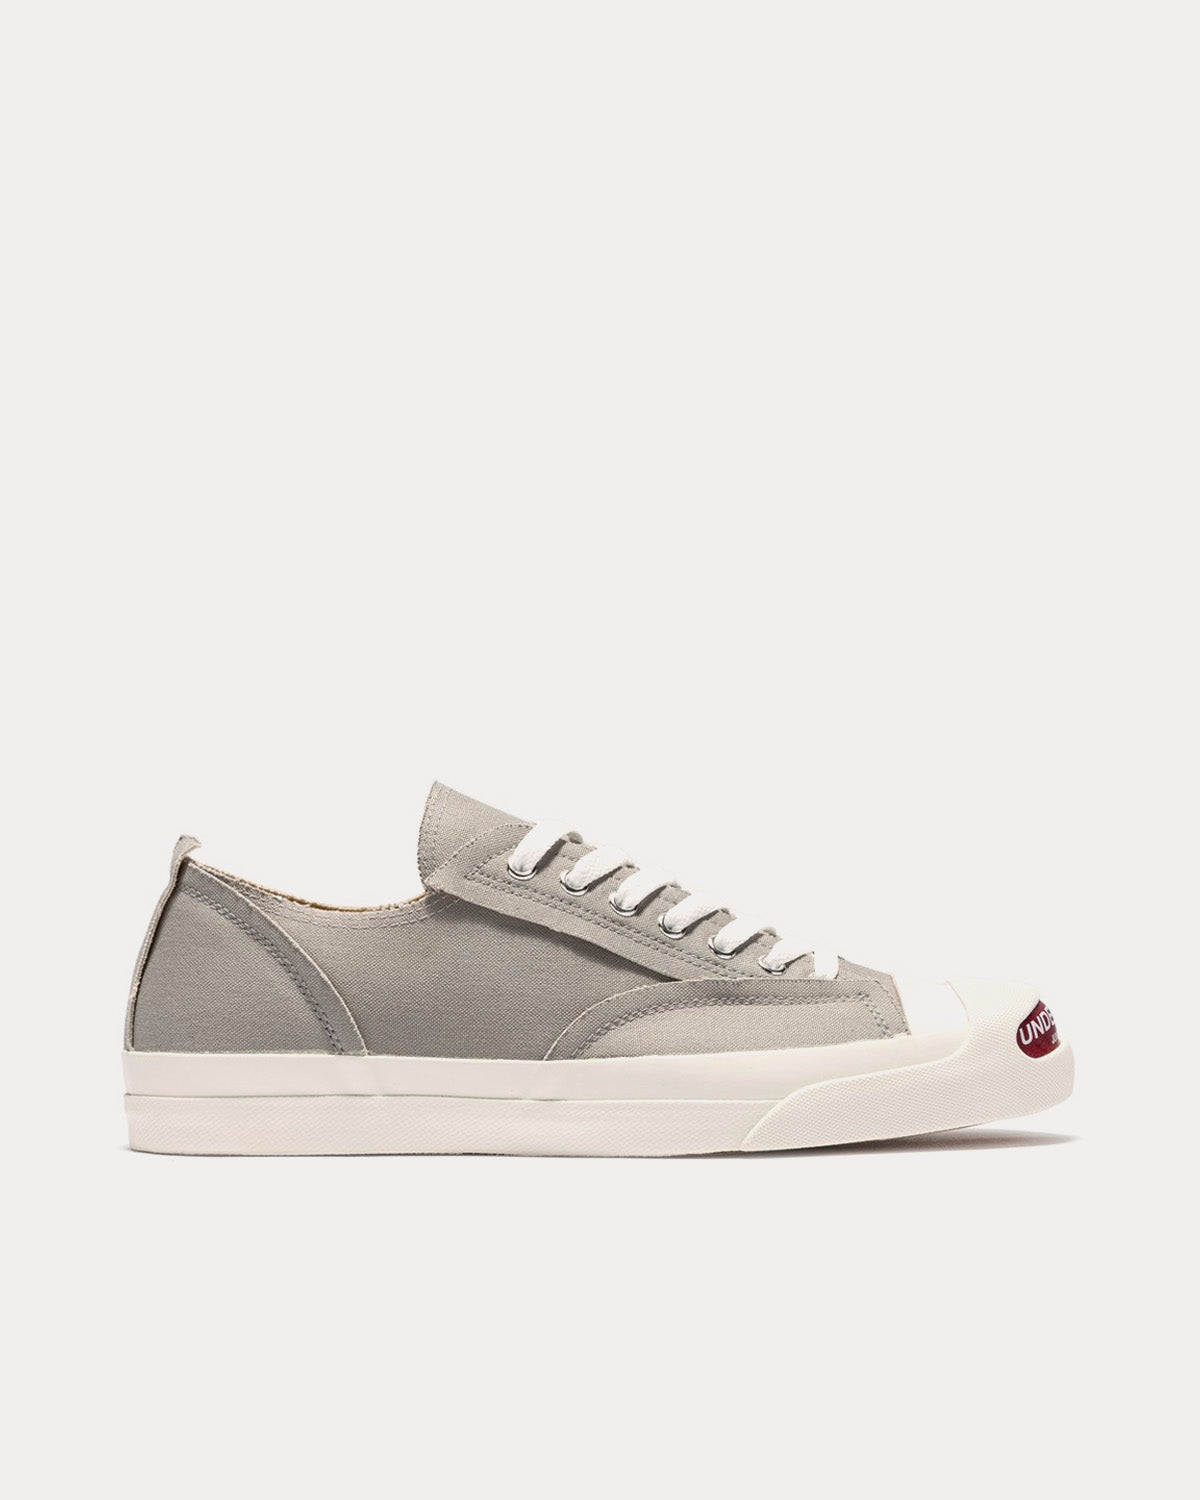 Undercover - Canvas Grey Low Top Sneakers